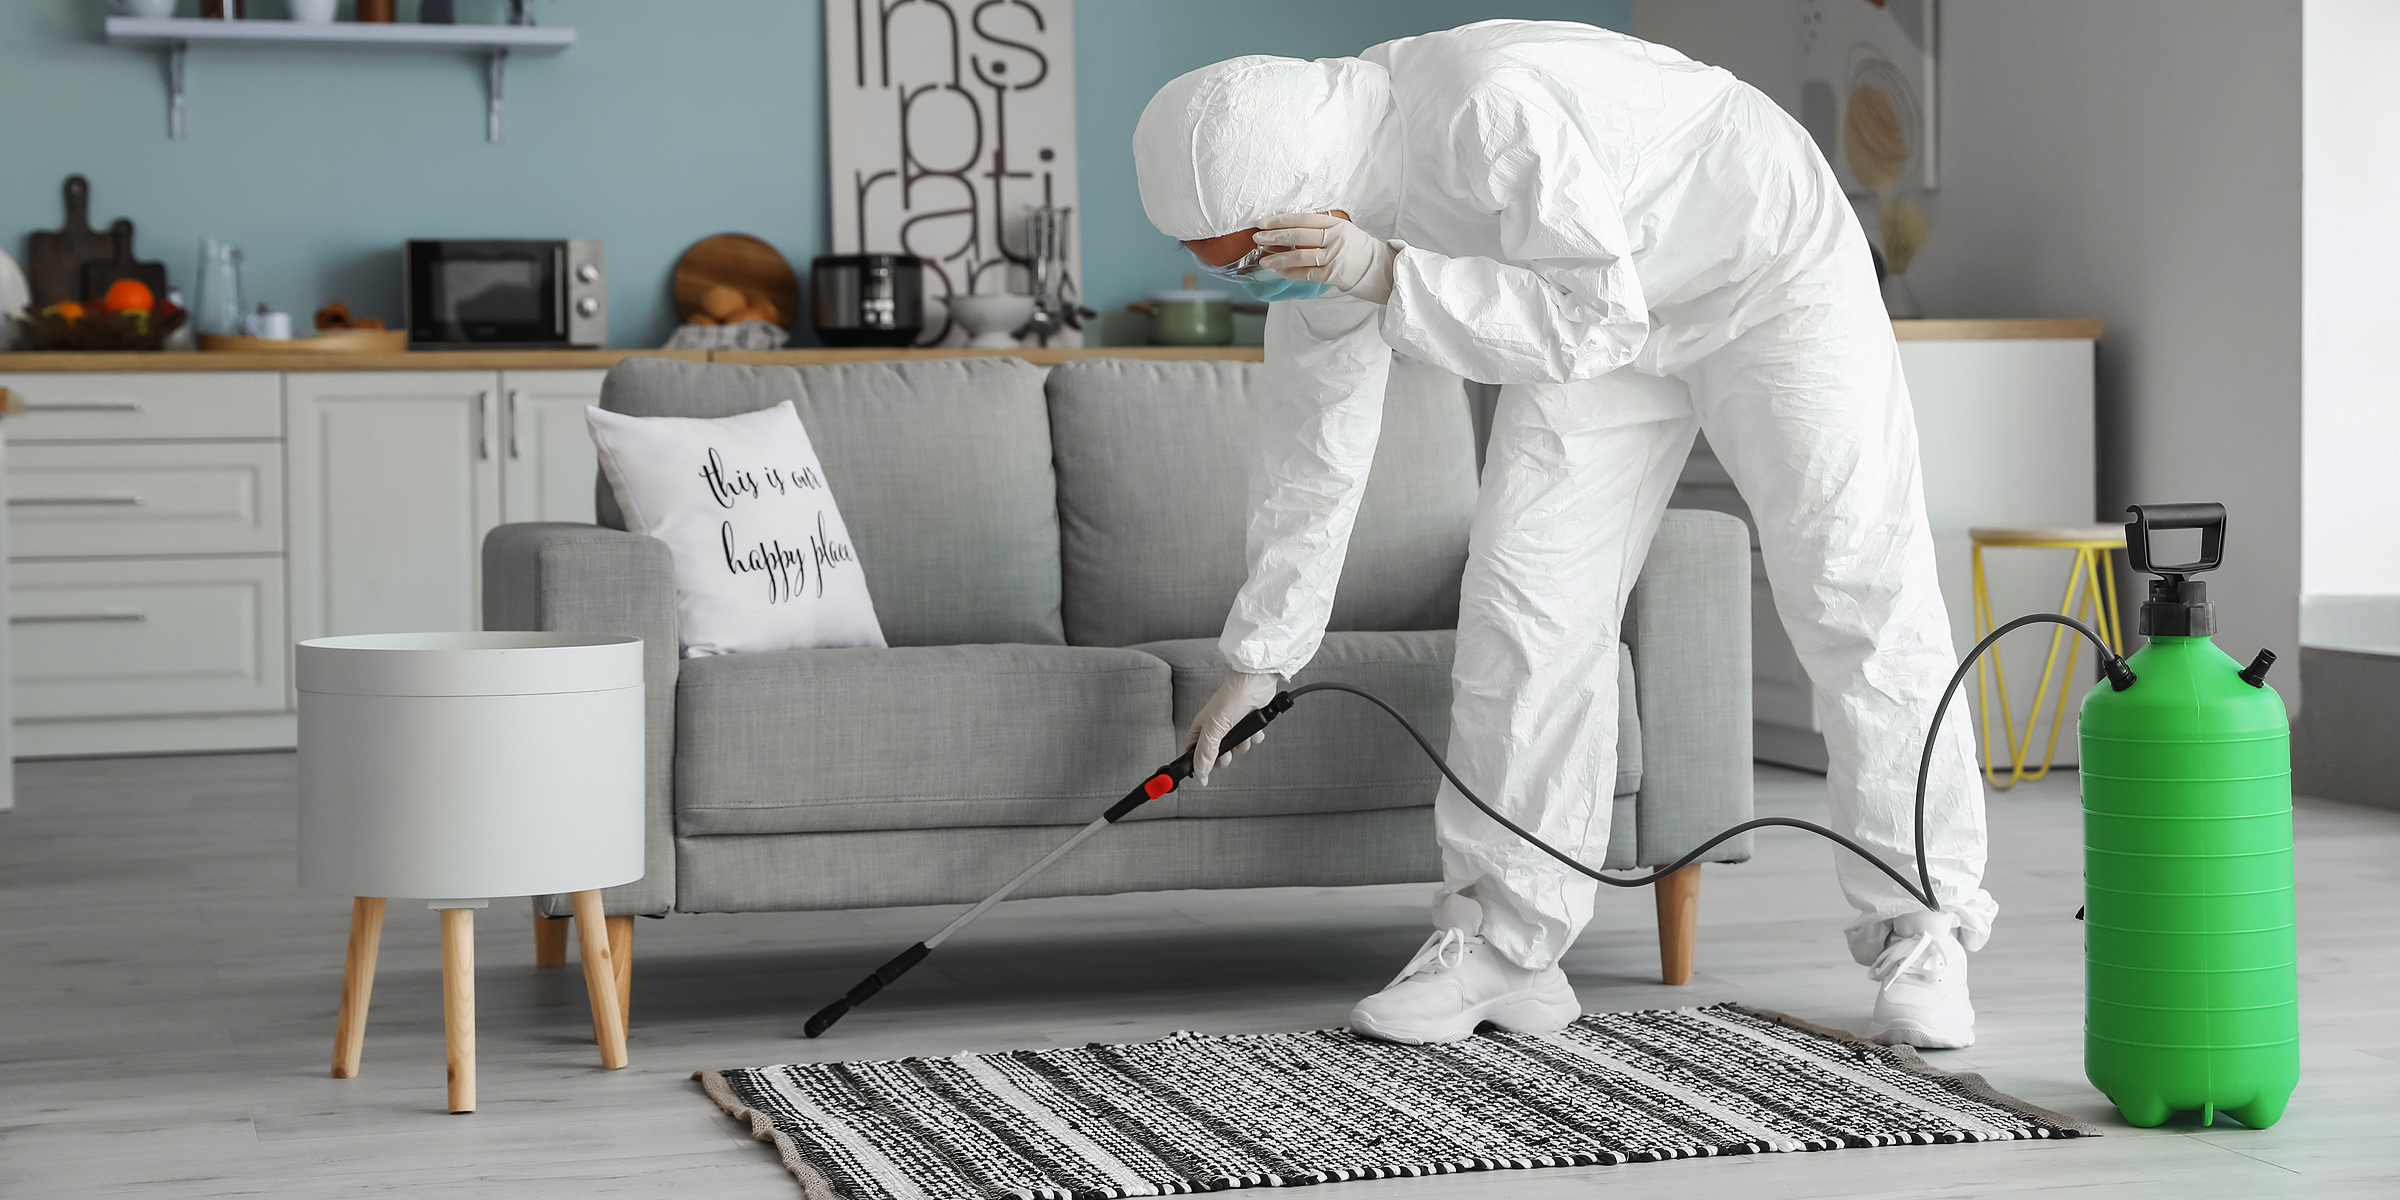 A person in protective gear fumigating a living room | Source: Shutterstock